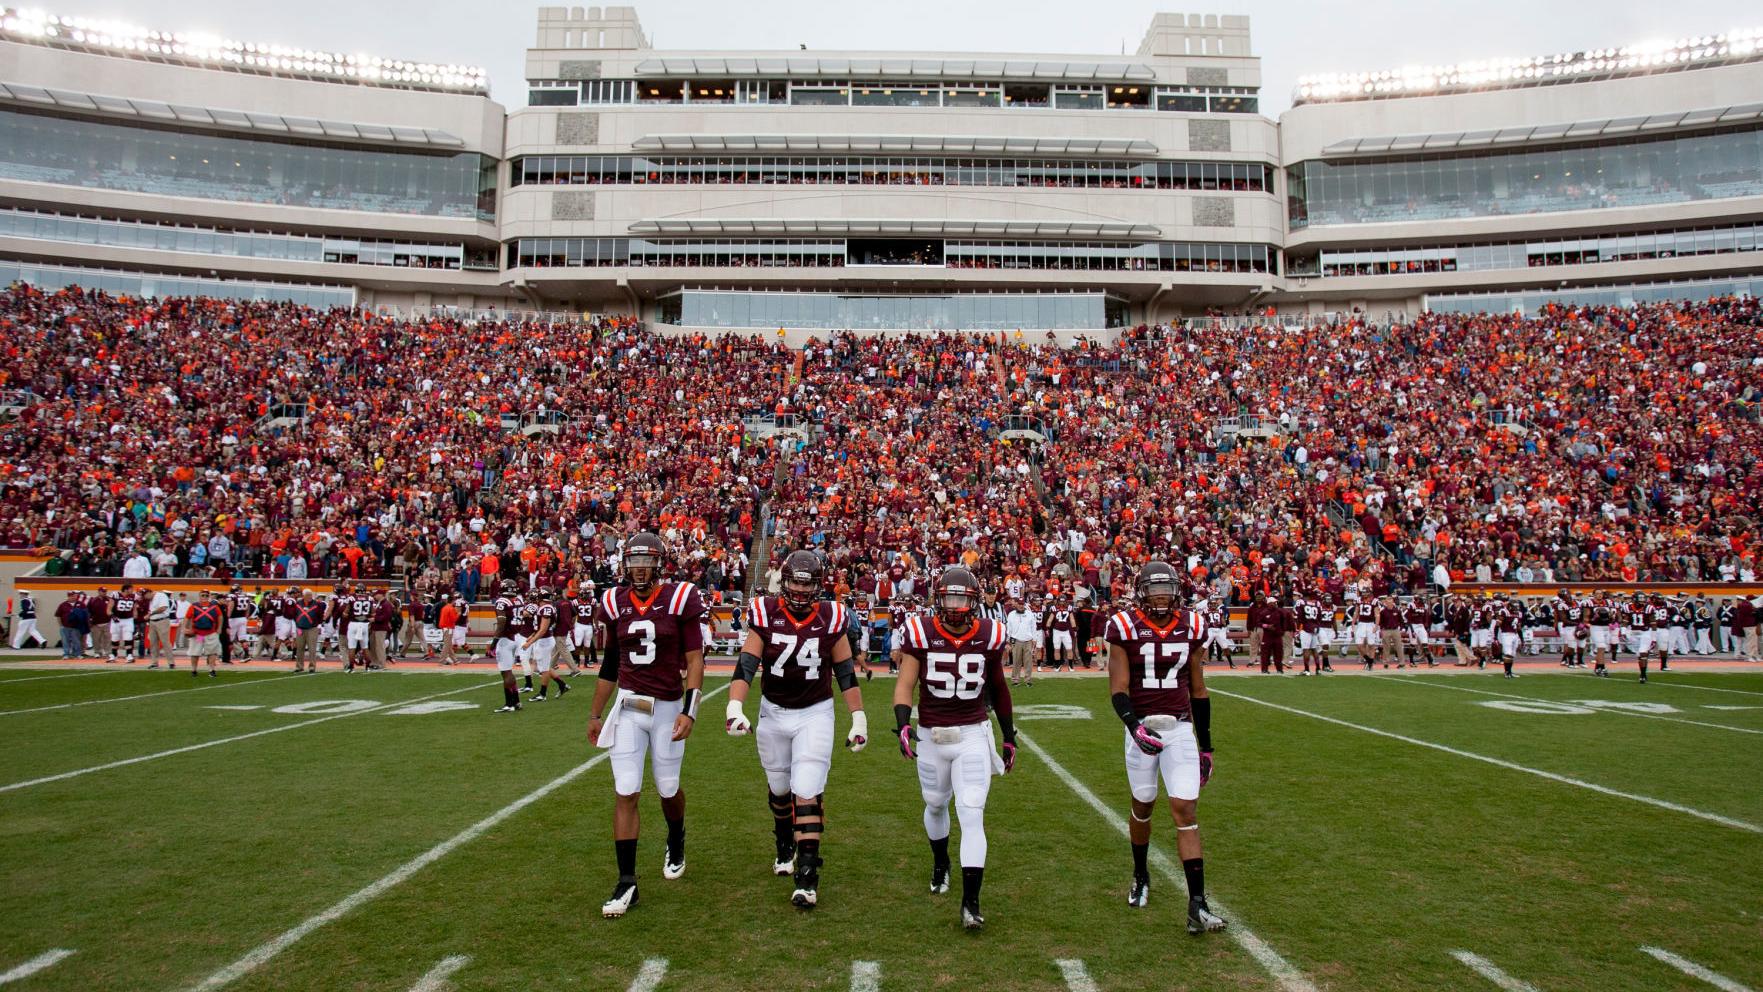 Thirty Percent Capacity No Student Section All Options On The Table For Lane Stadium This Fall Virginia Tech Roanoke Com